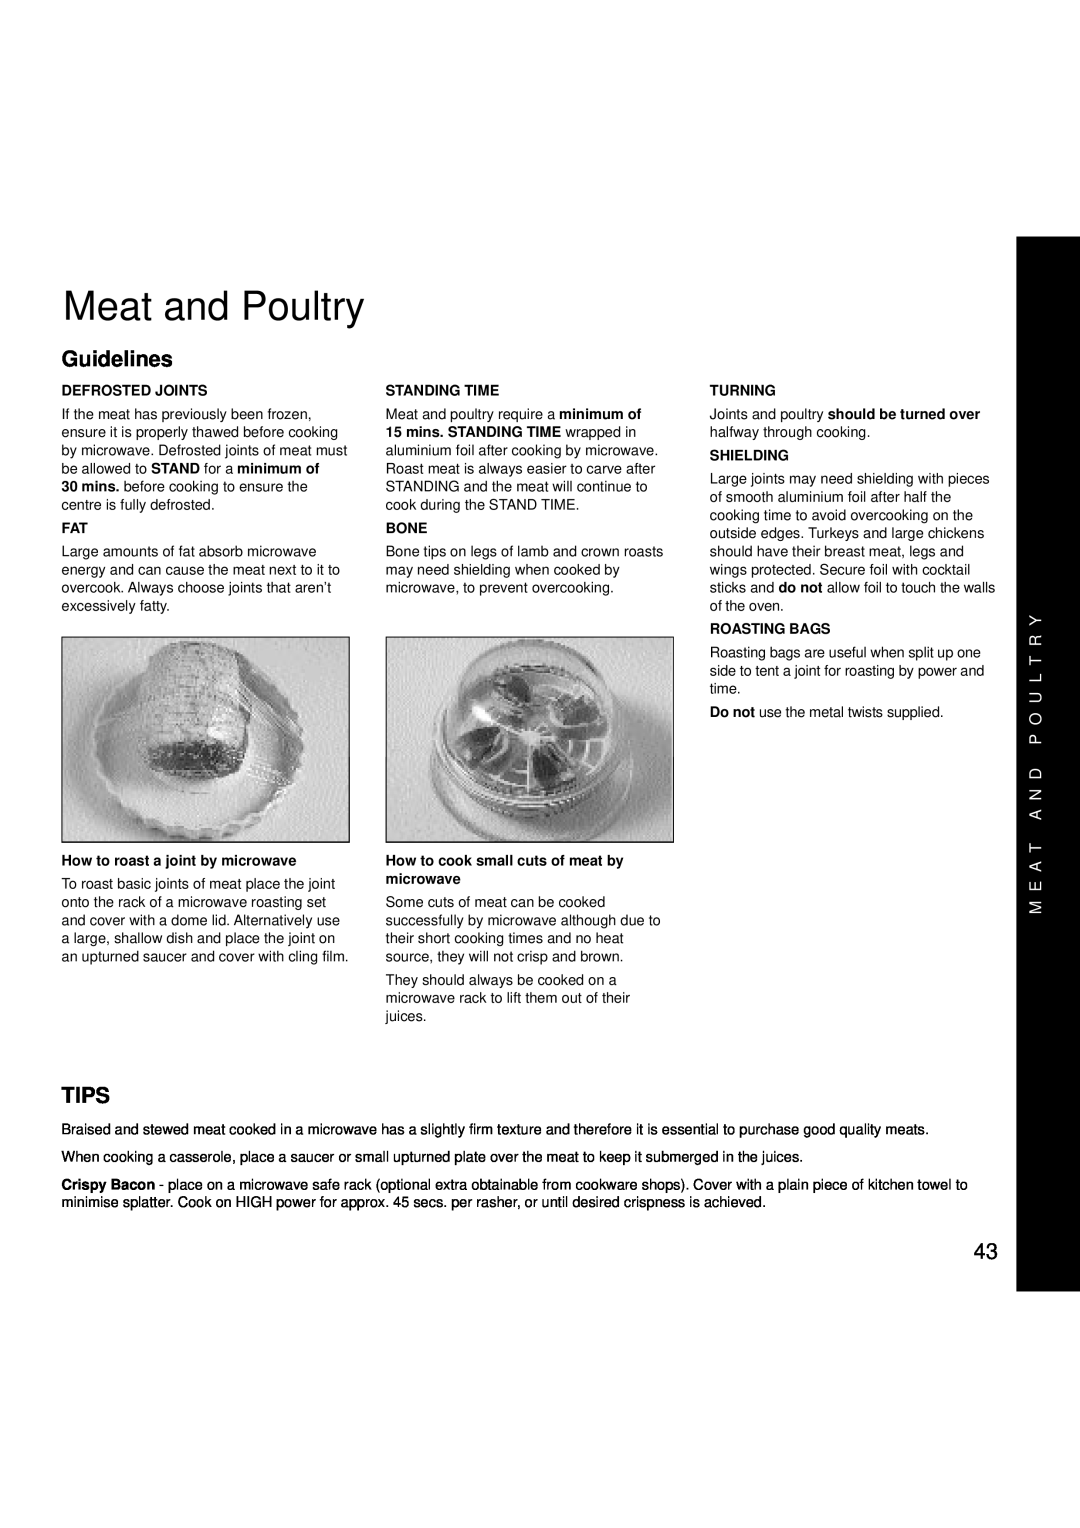 Creda MBO55 manual Meat and Poultry, Guidelines, Tips, M E A T A N D P O U L T R Y, Defrosted Joints, Standing Time, Bone 